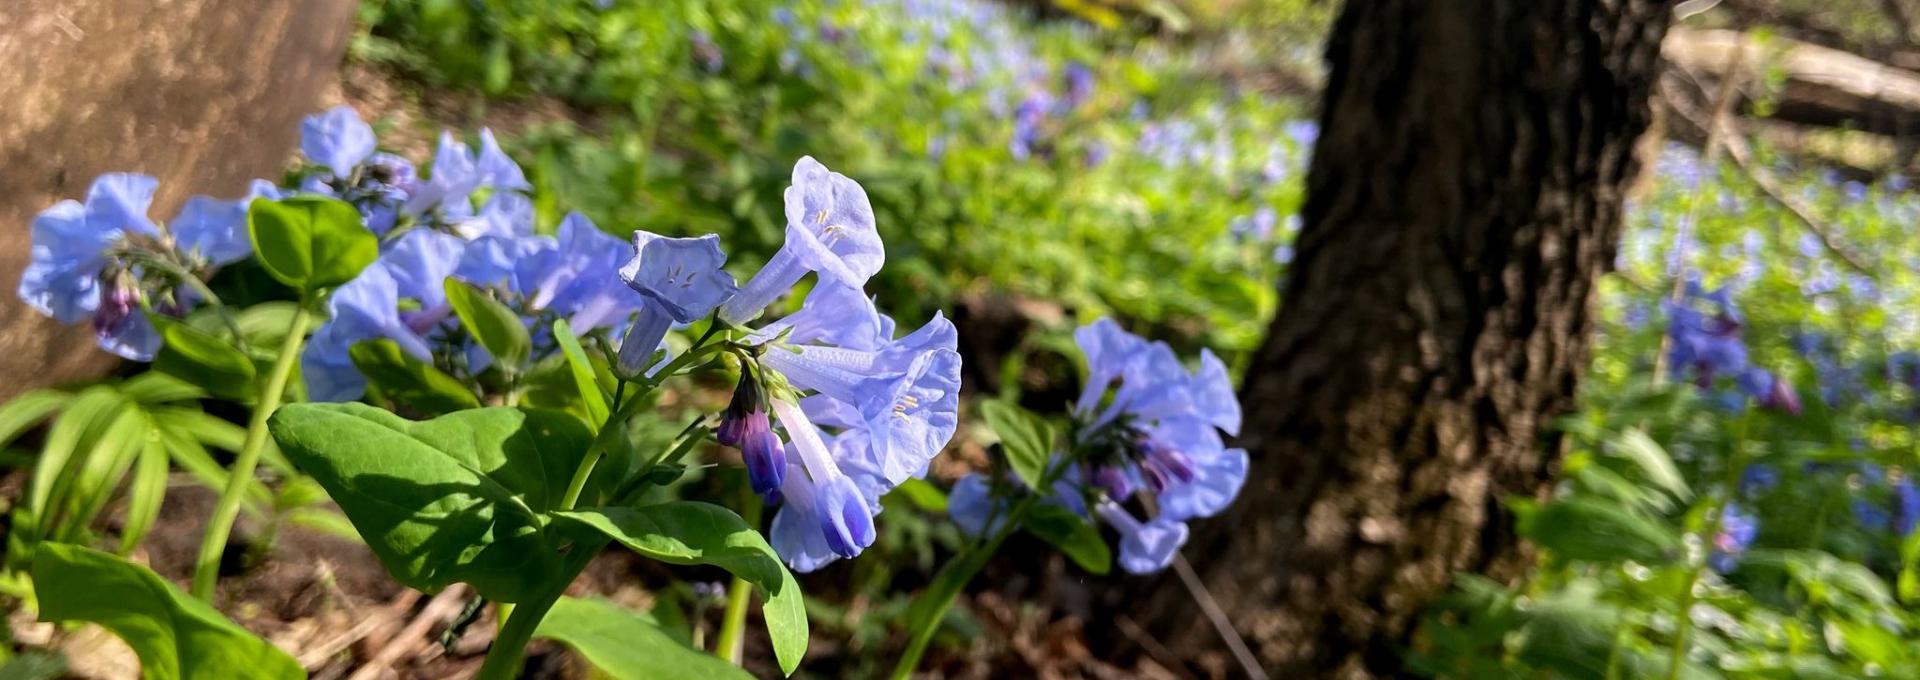 Image of blue bell flowers